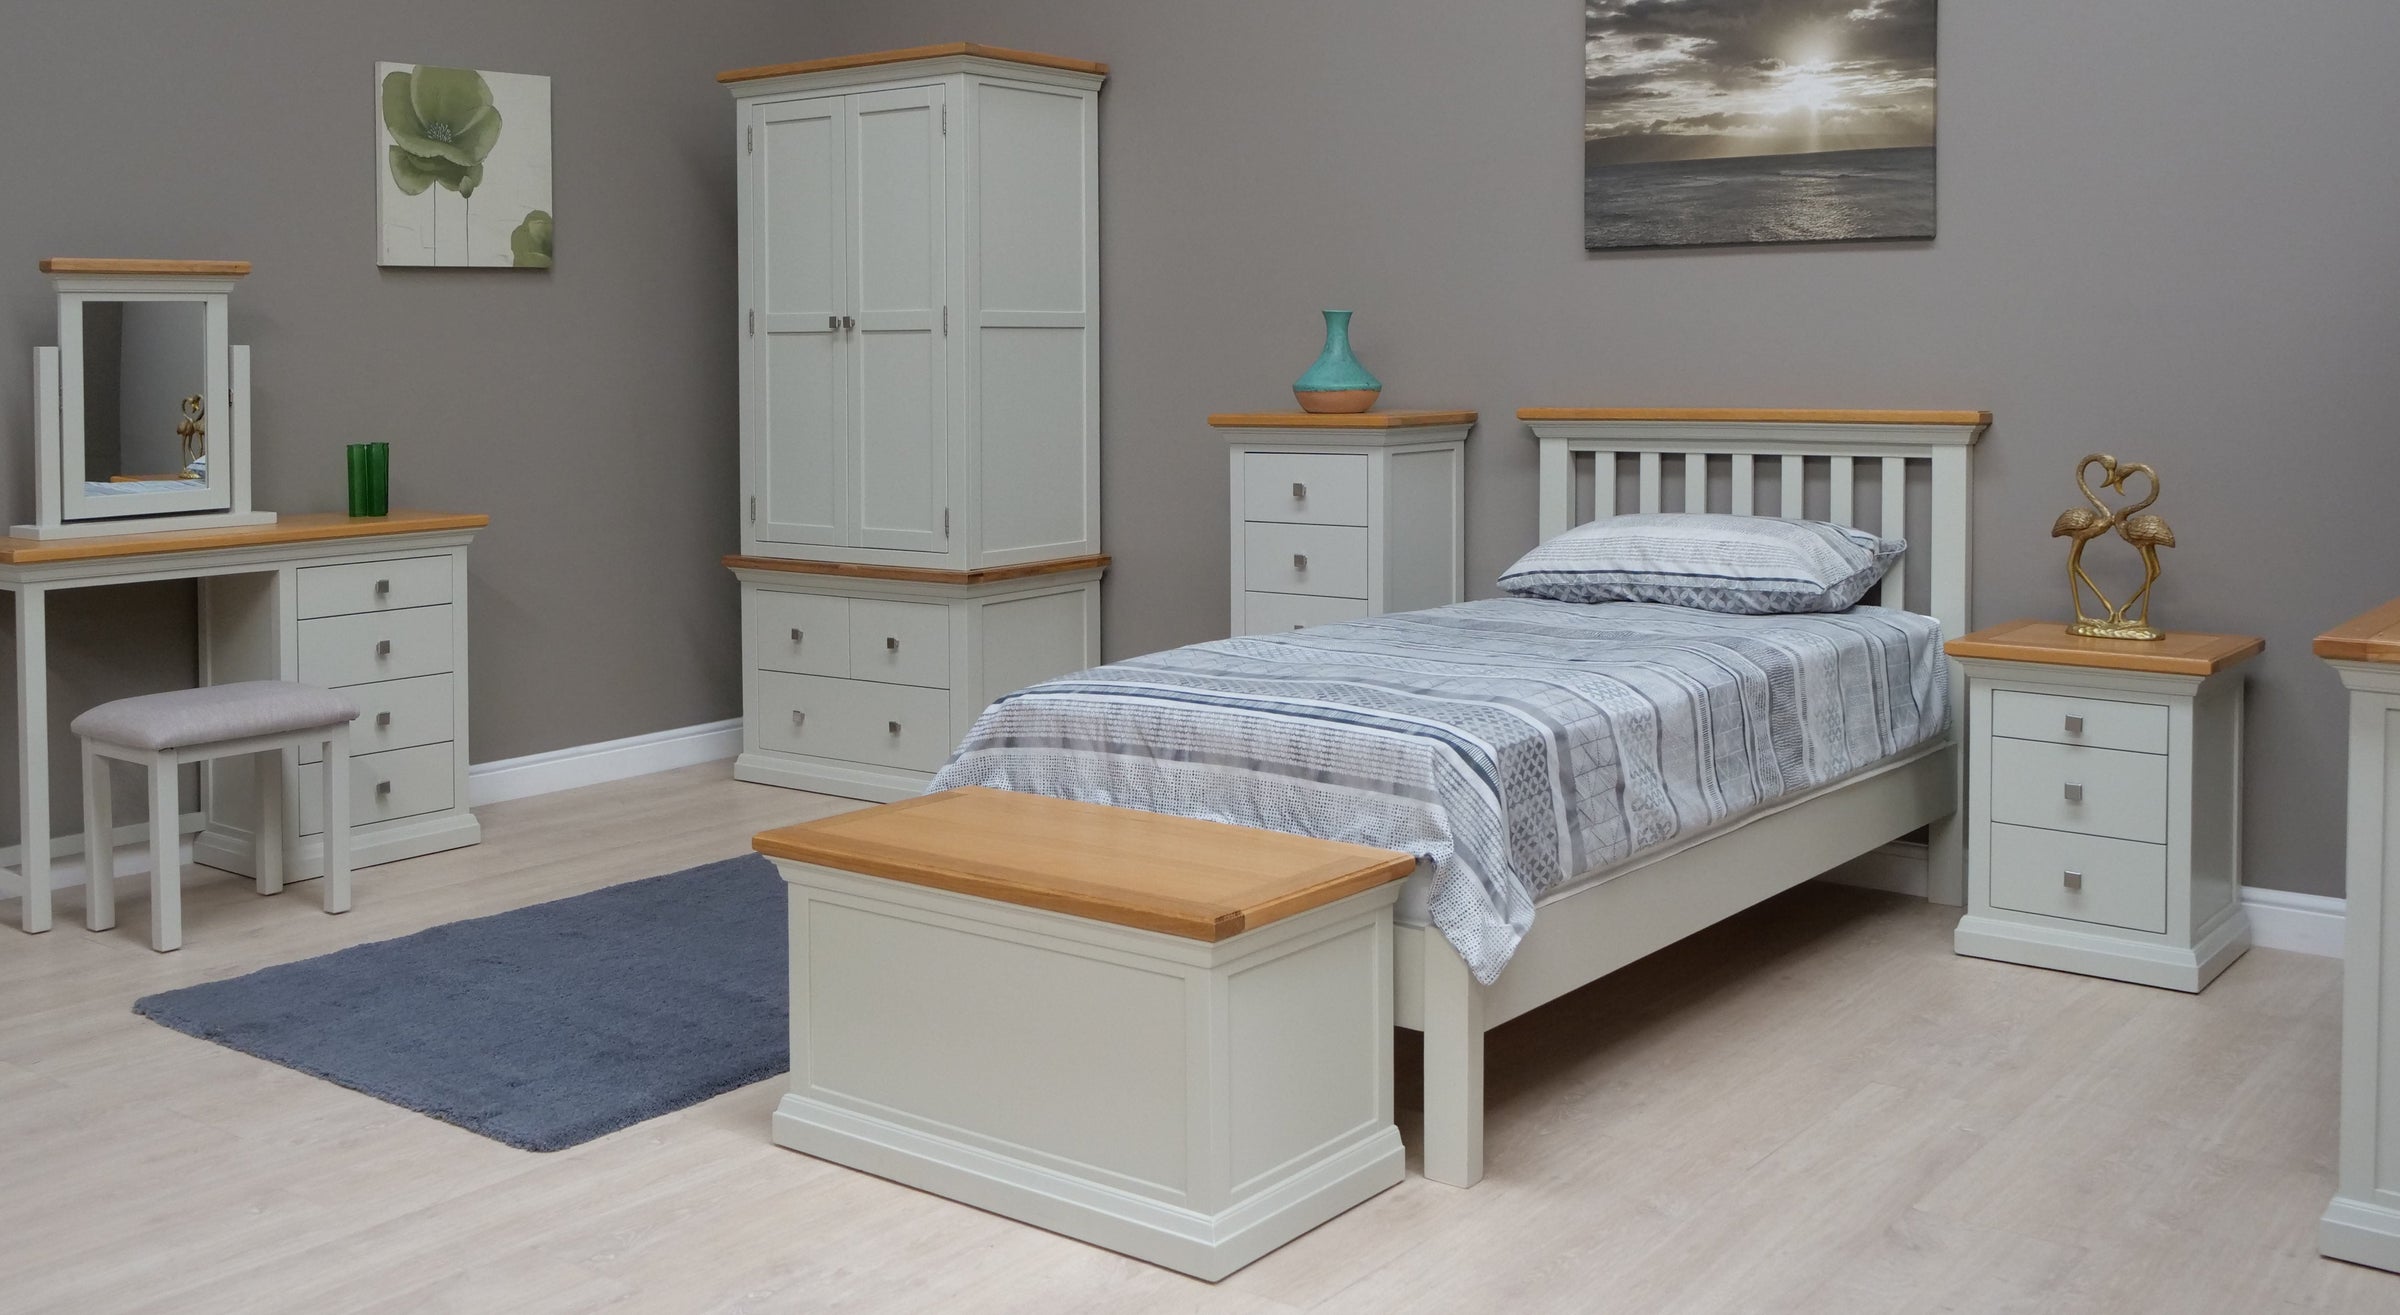 Twemlow Farrow and Ball painted Furniture from Top Secret Furniture